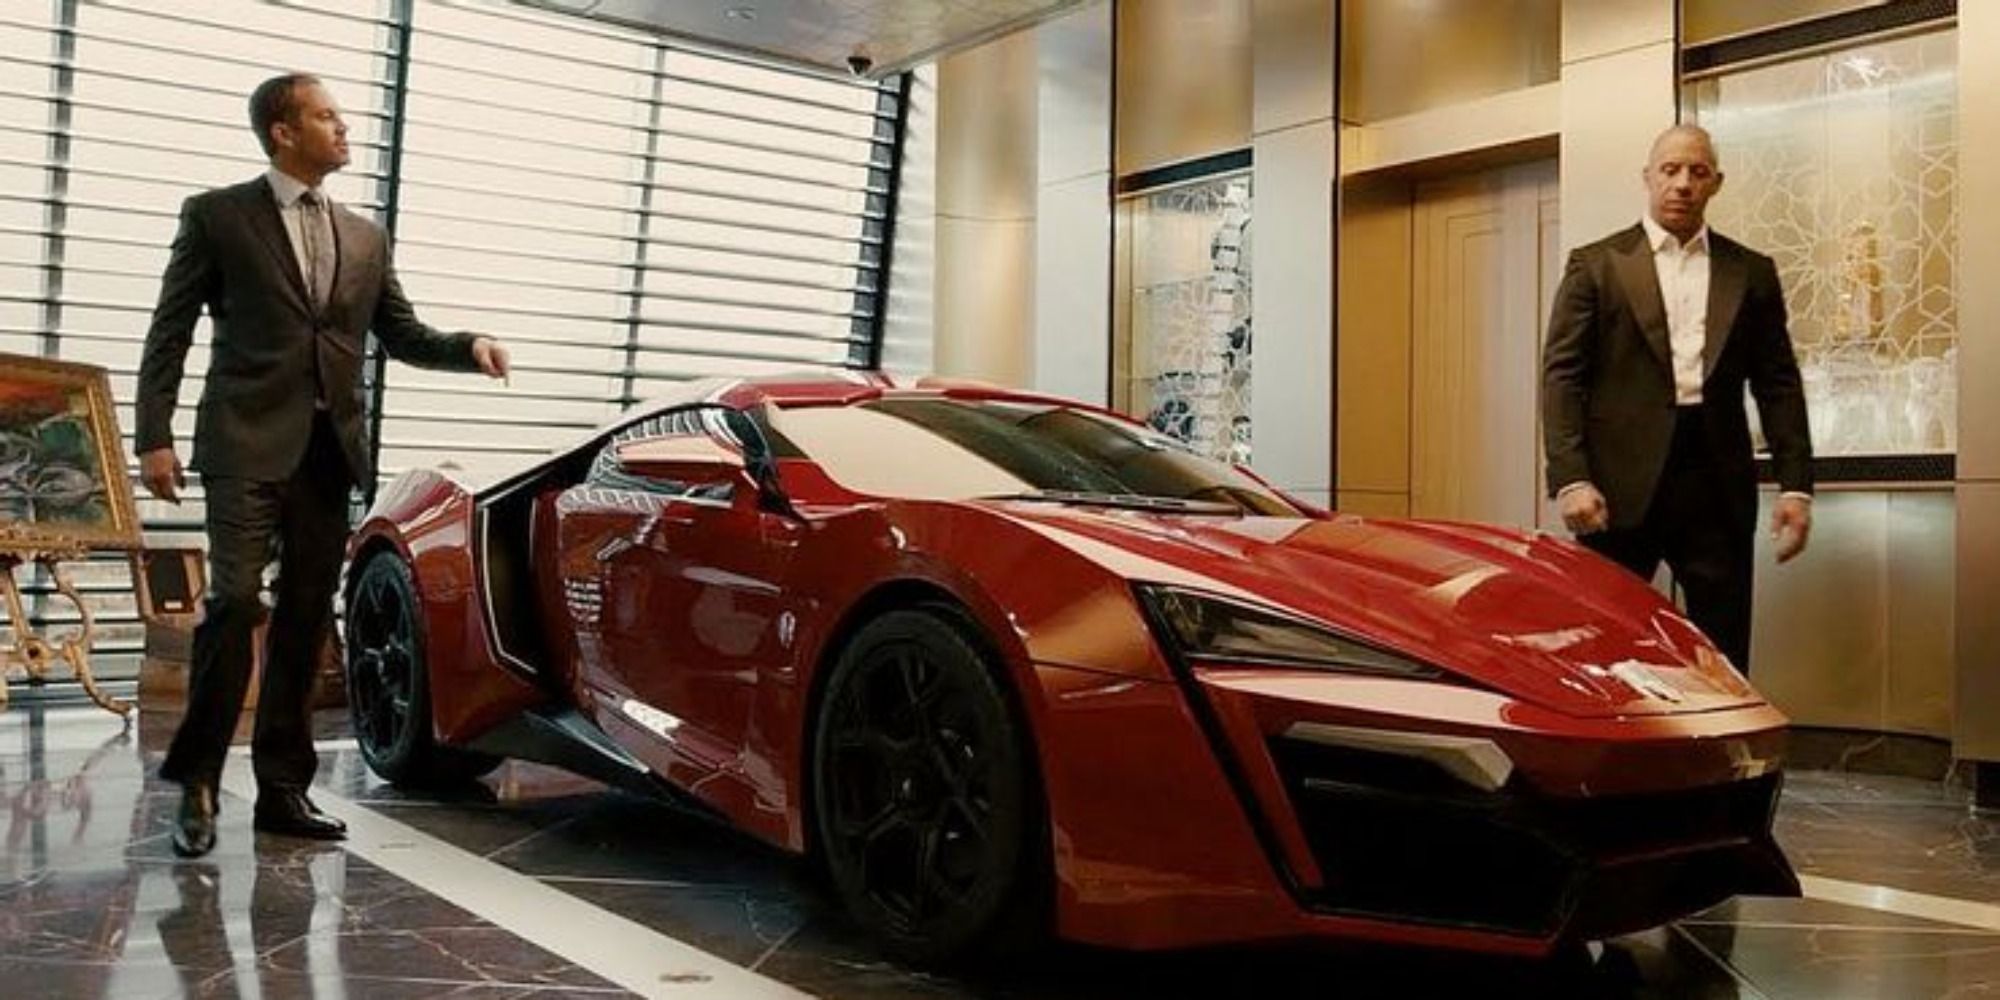 Dom and Brian standing next to a red supercar in Furious 7